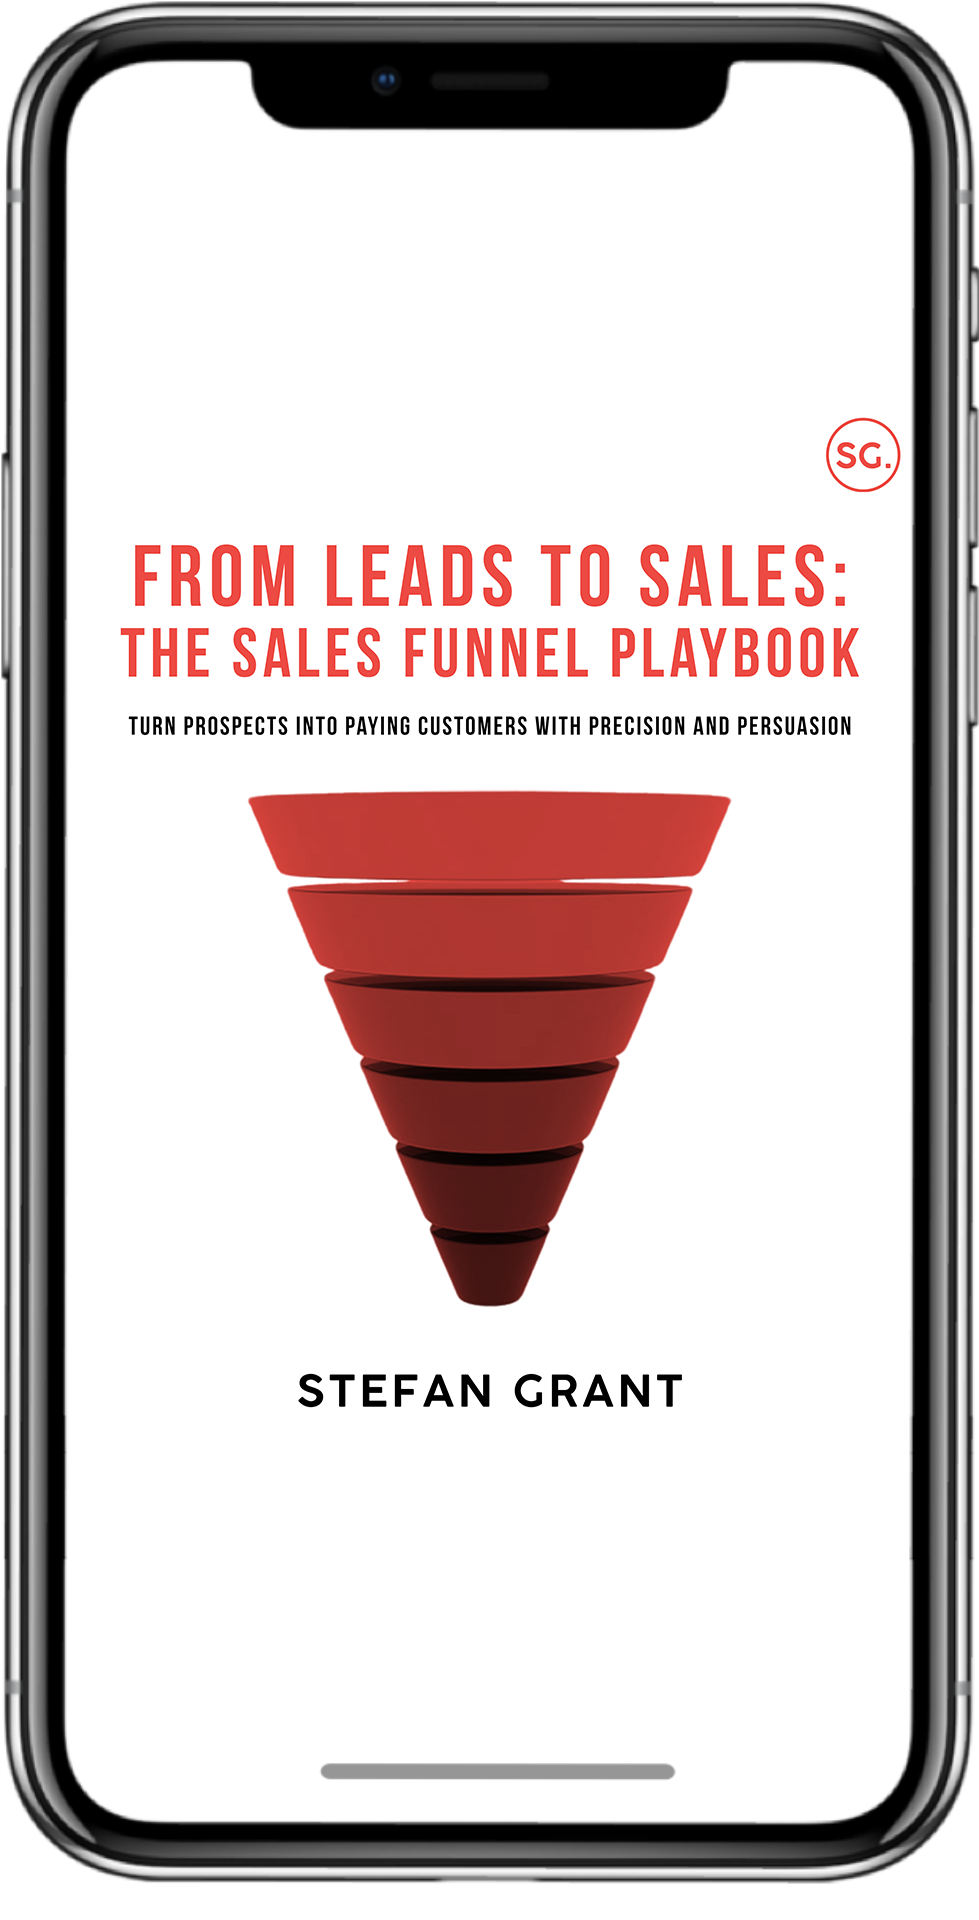 Sales Funnel Visualization - Learn the stages of a sales funnel